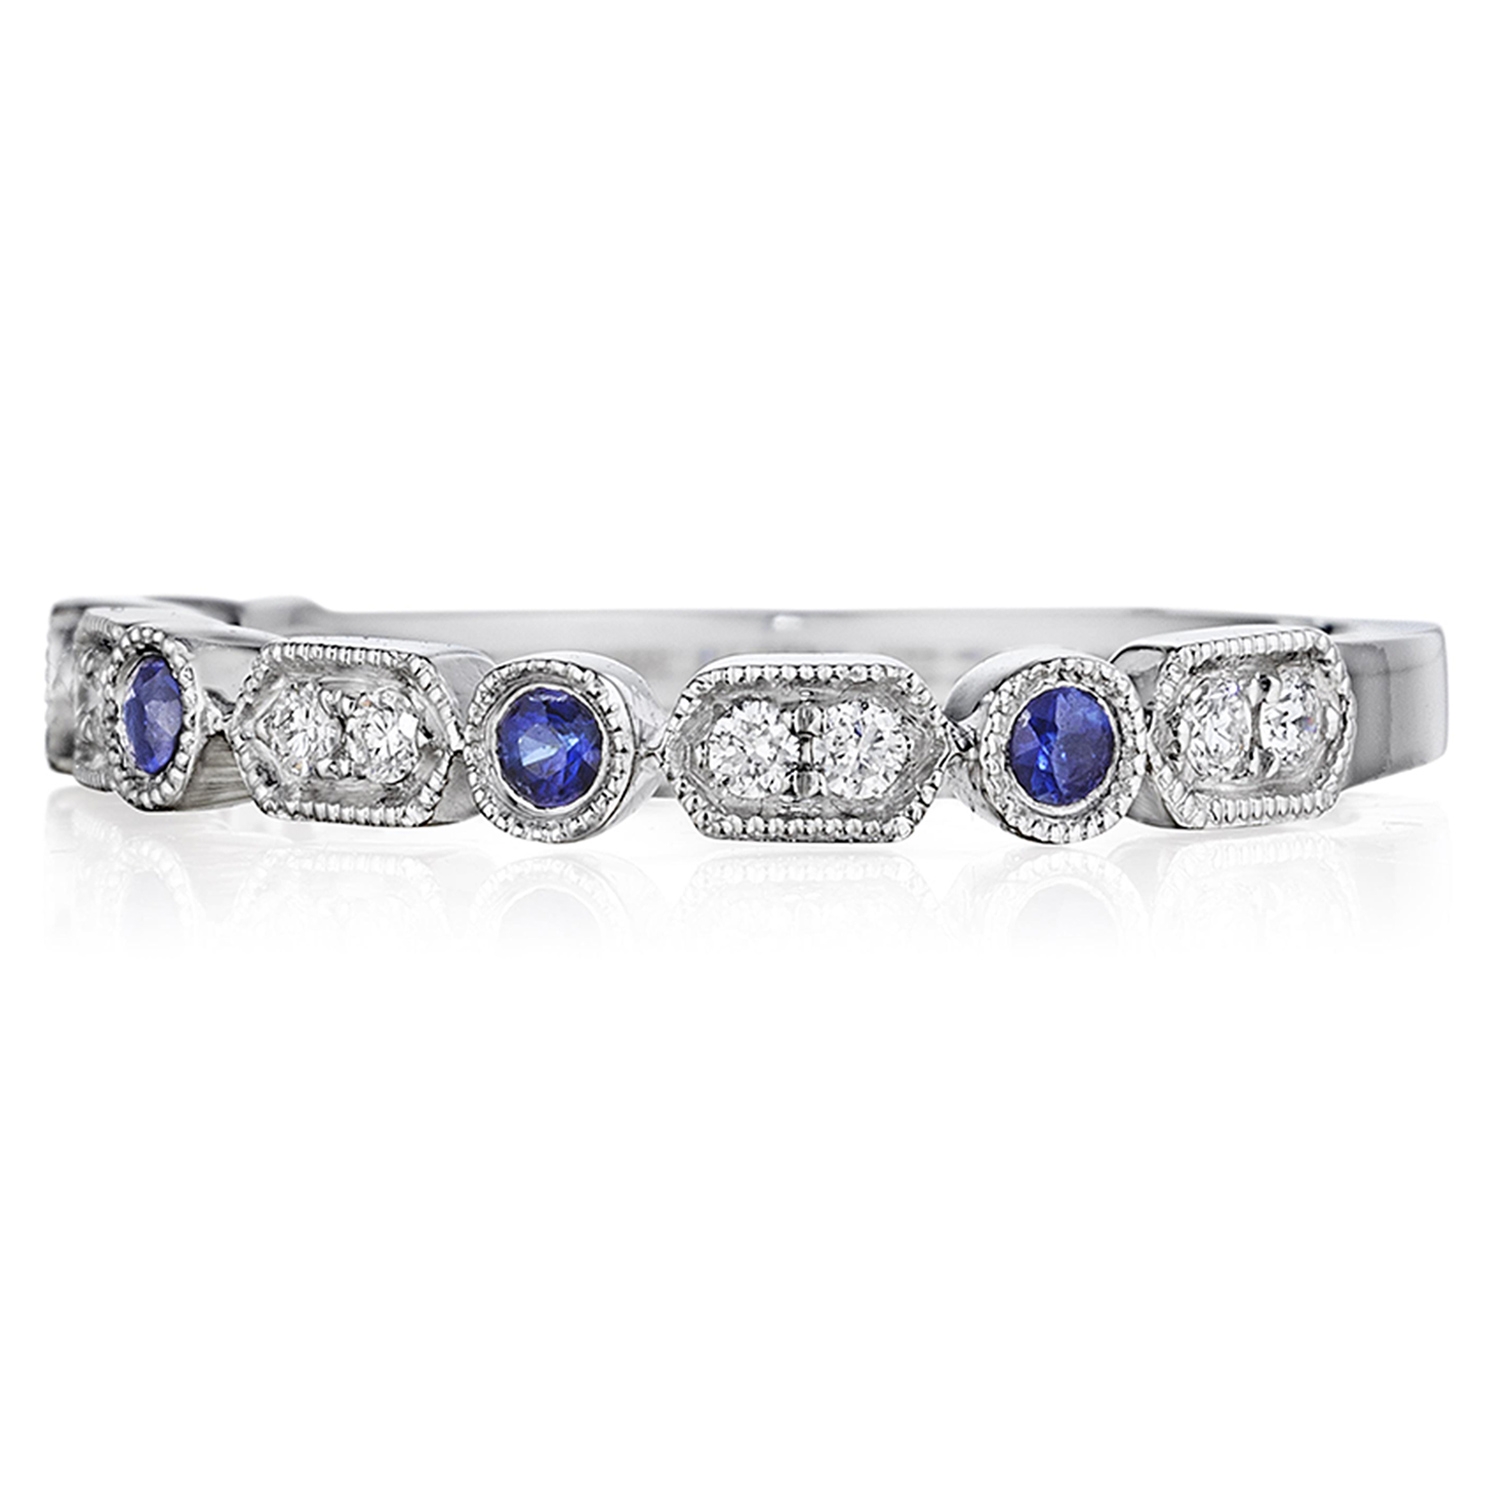 Henri Daussi R43-6 Bead and Bezel Set Diamond and Sapphire Band with Miligrain Detail Alternative View 1